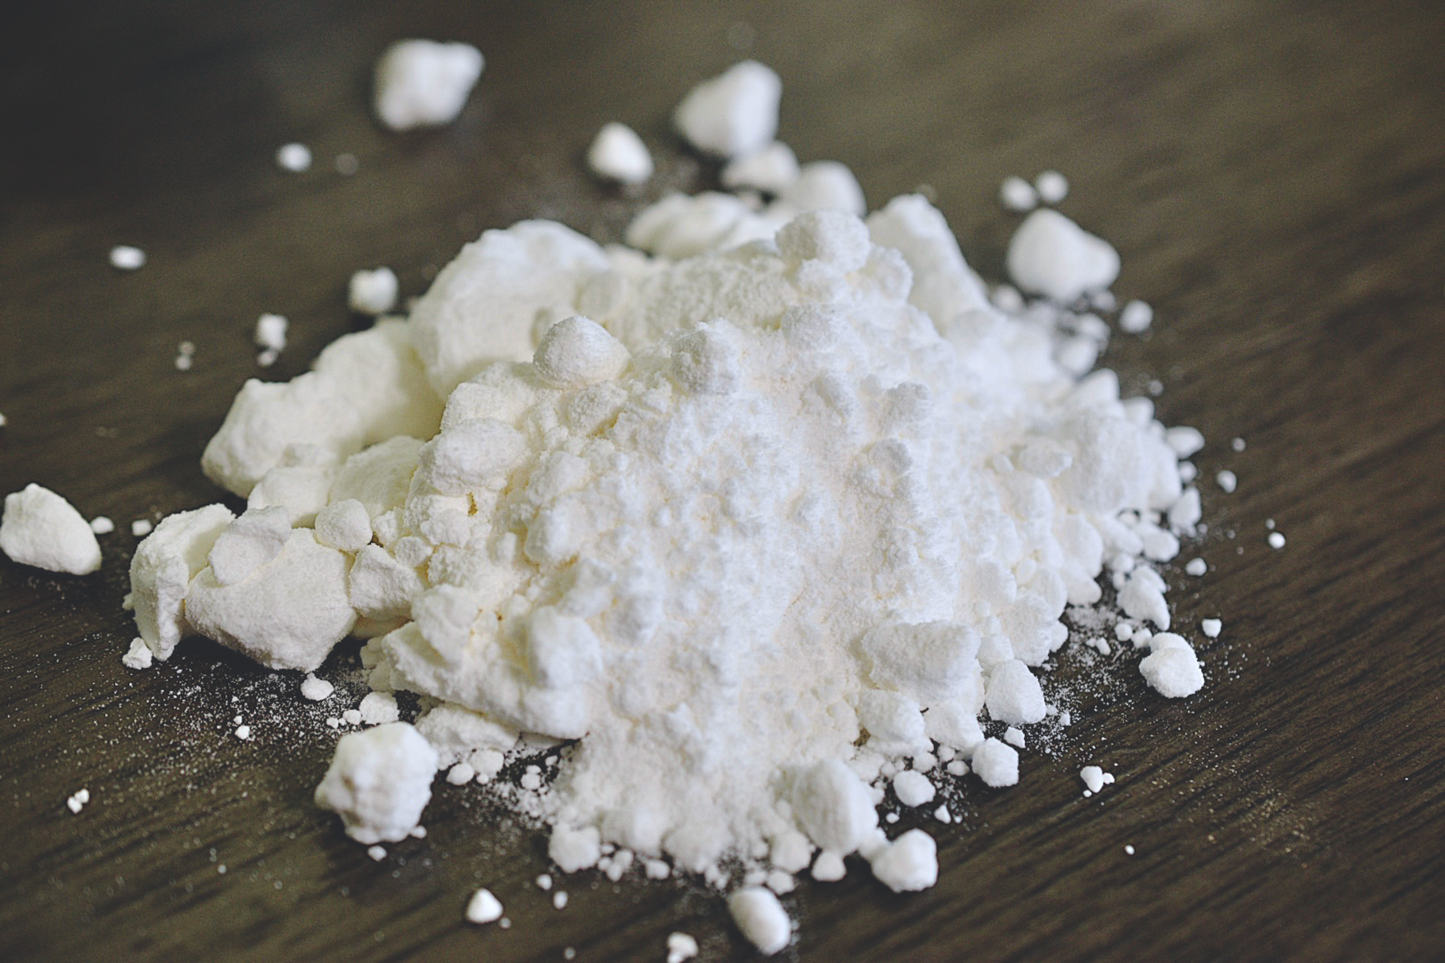 A close up view of the white and silky coconut milk powder rests on a wooden surface. Small clumps of powder are in the background of the photo.